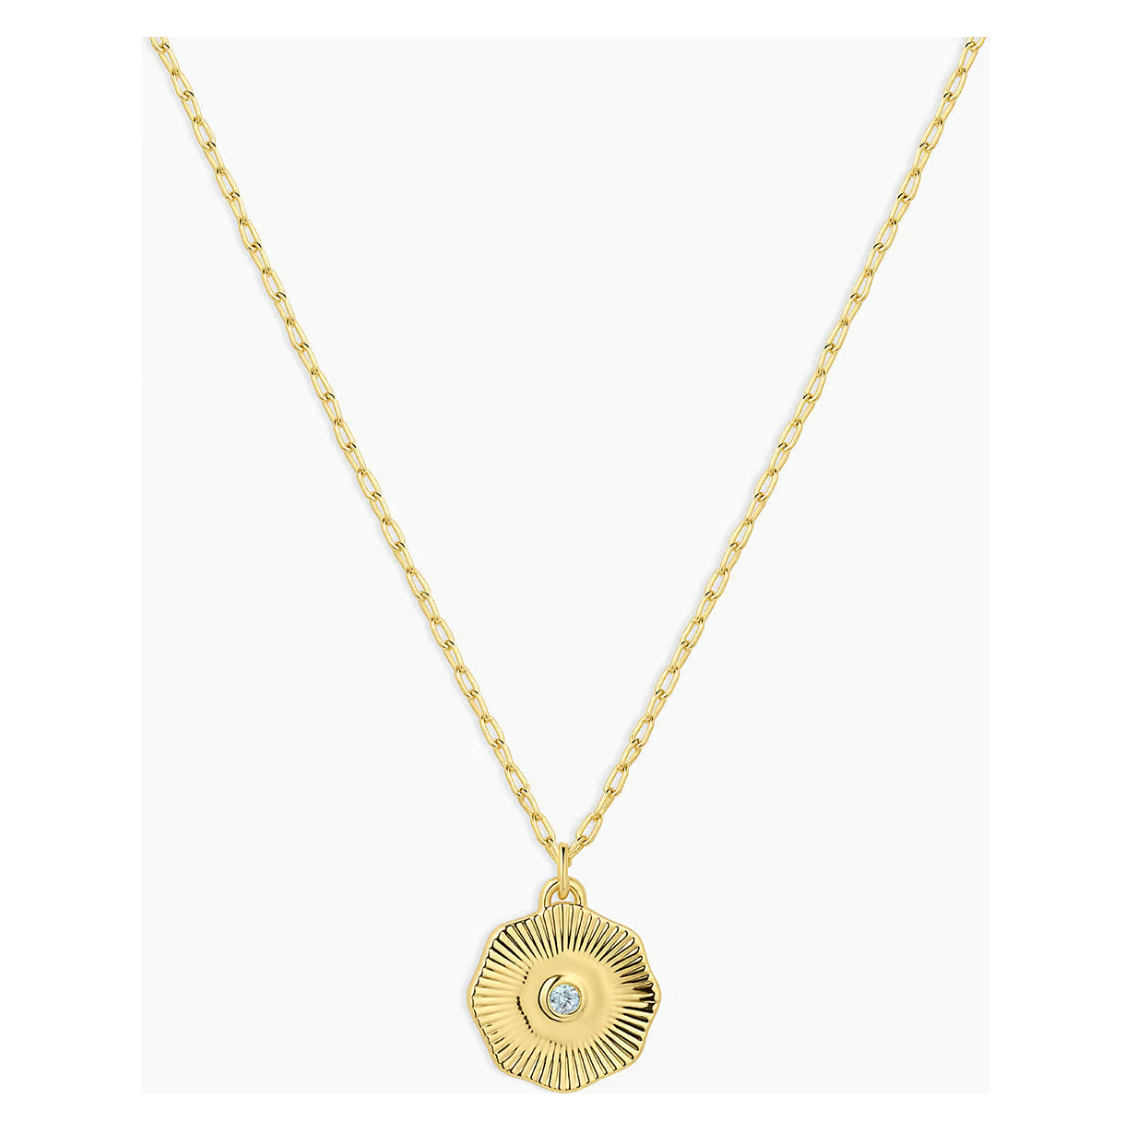 Birthstone Coin Necklace - March